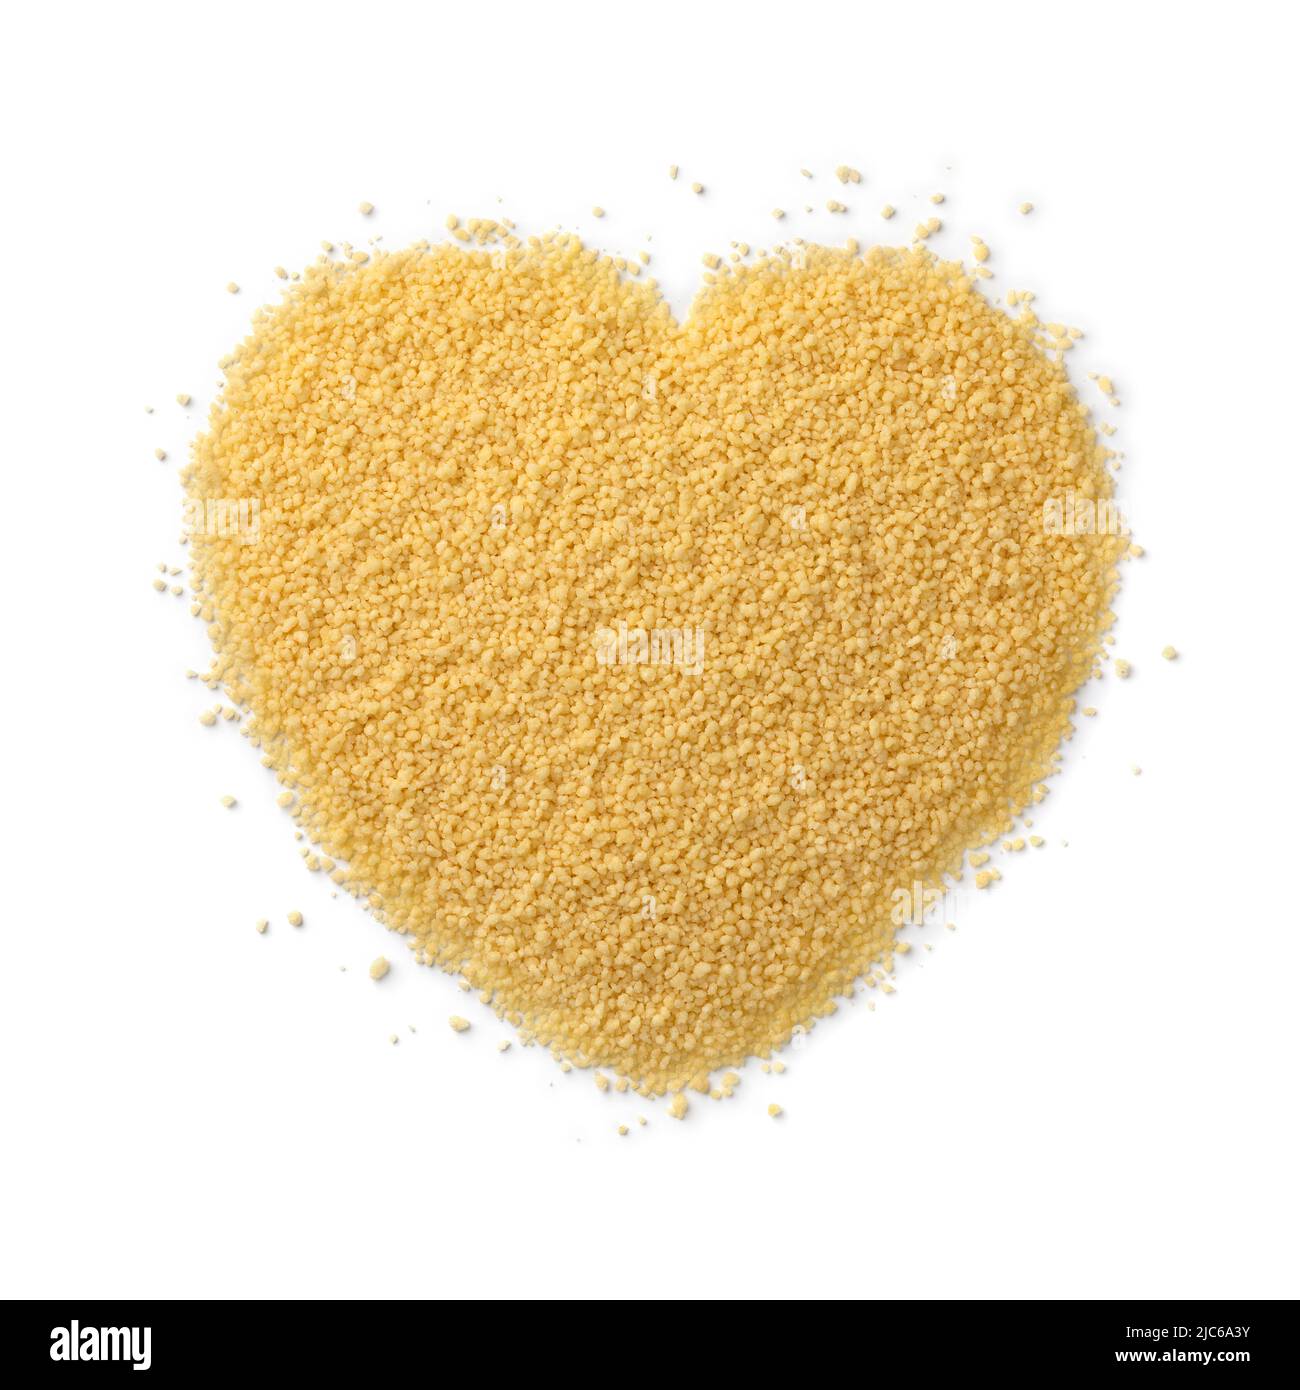 Dried uncooked couscous in heart shape isolated on white background Stock Photo